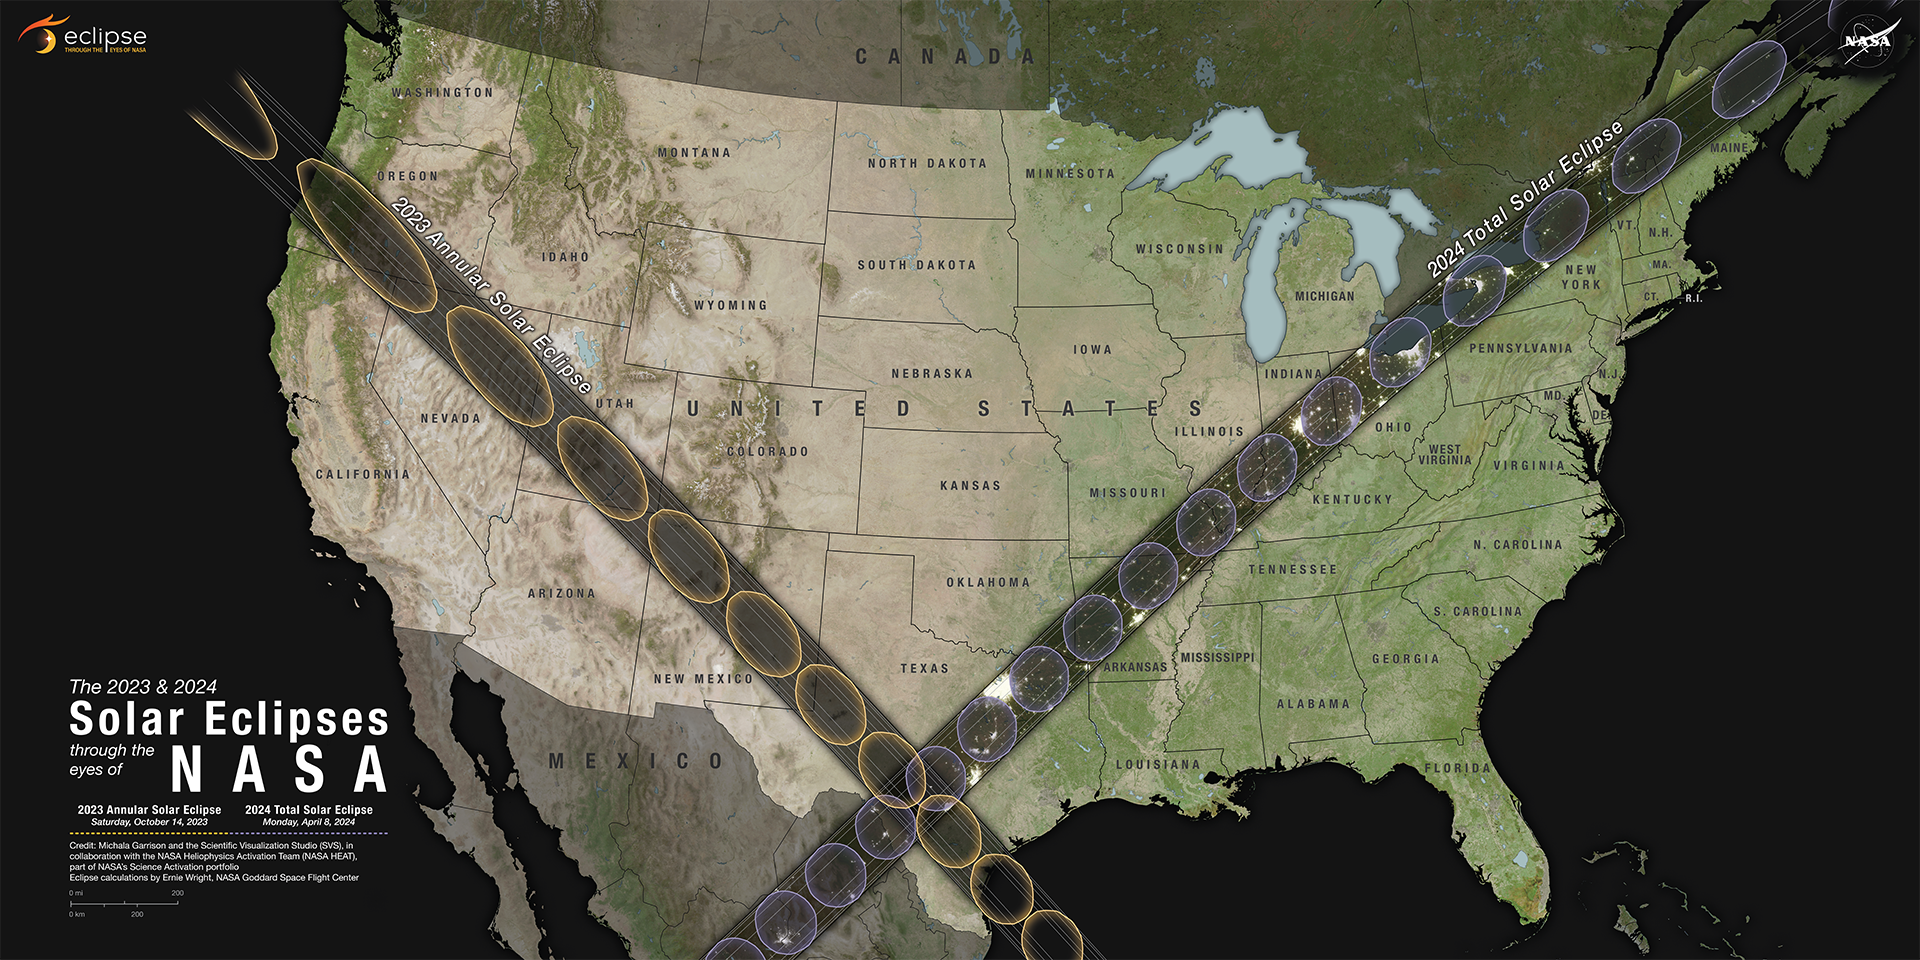 Map of the United States with paths of the 2023 Annular Solar Eclipse and the 2024 Total Solar Eclipse.